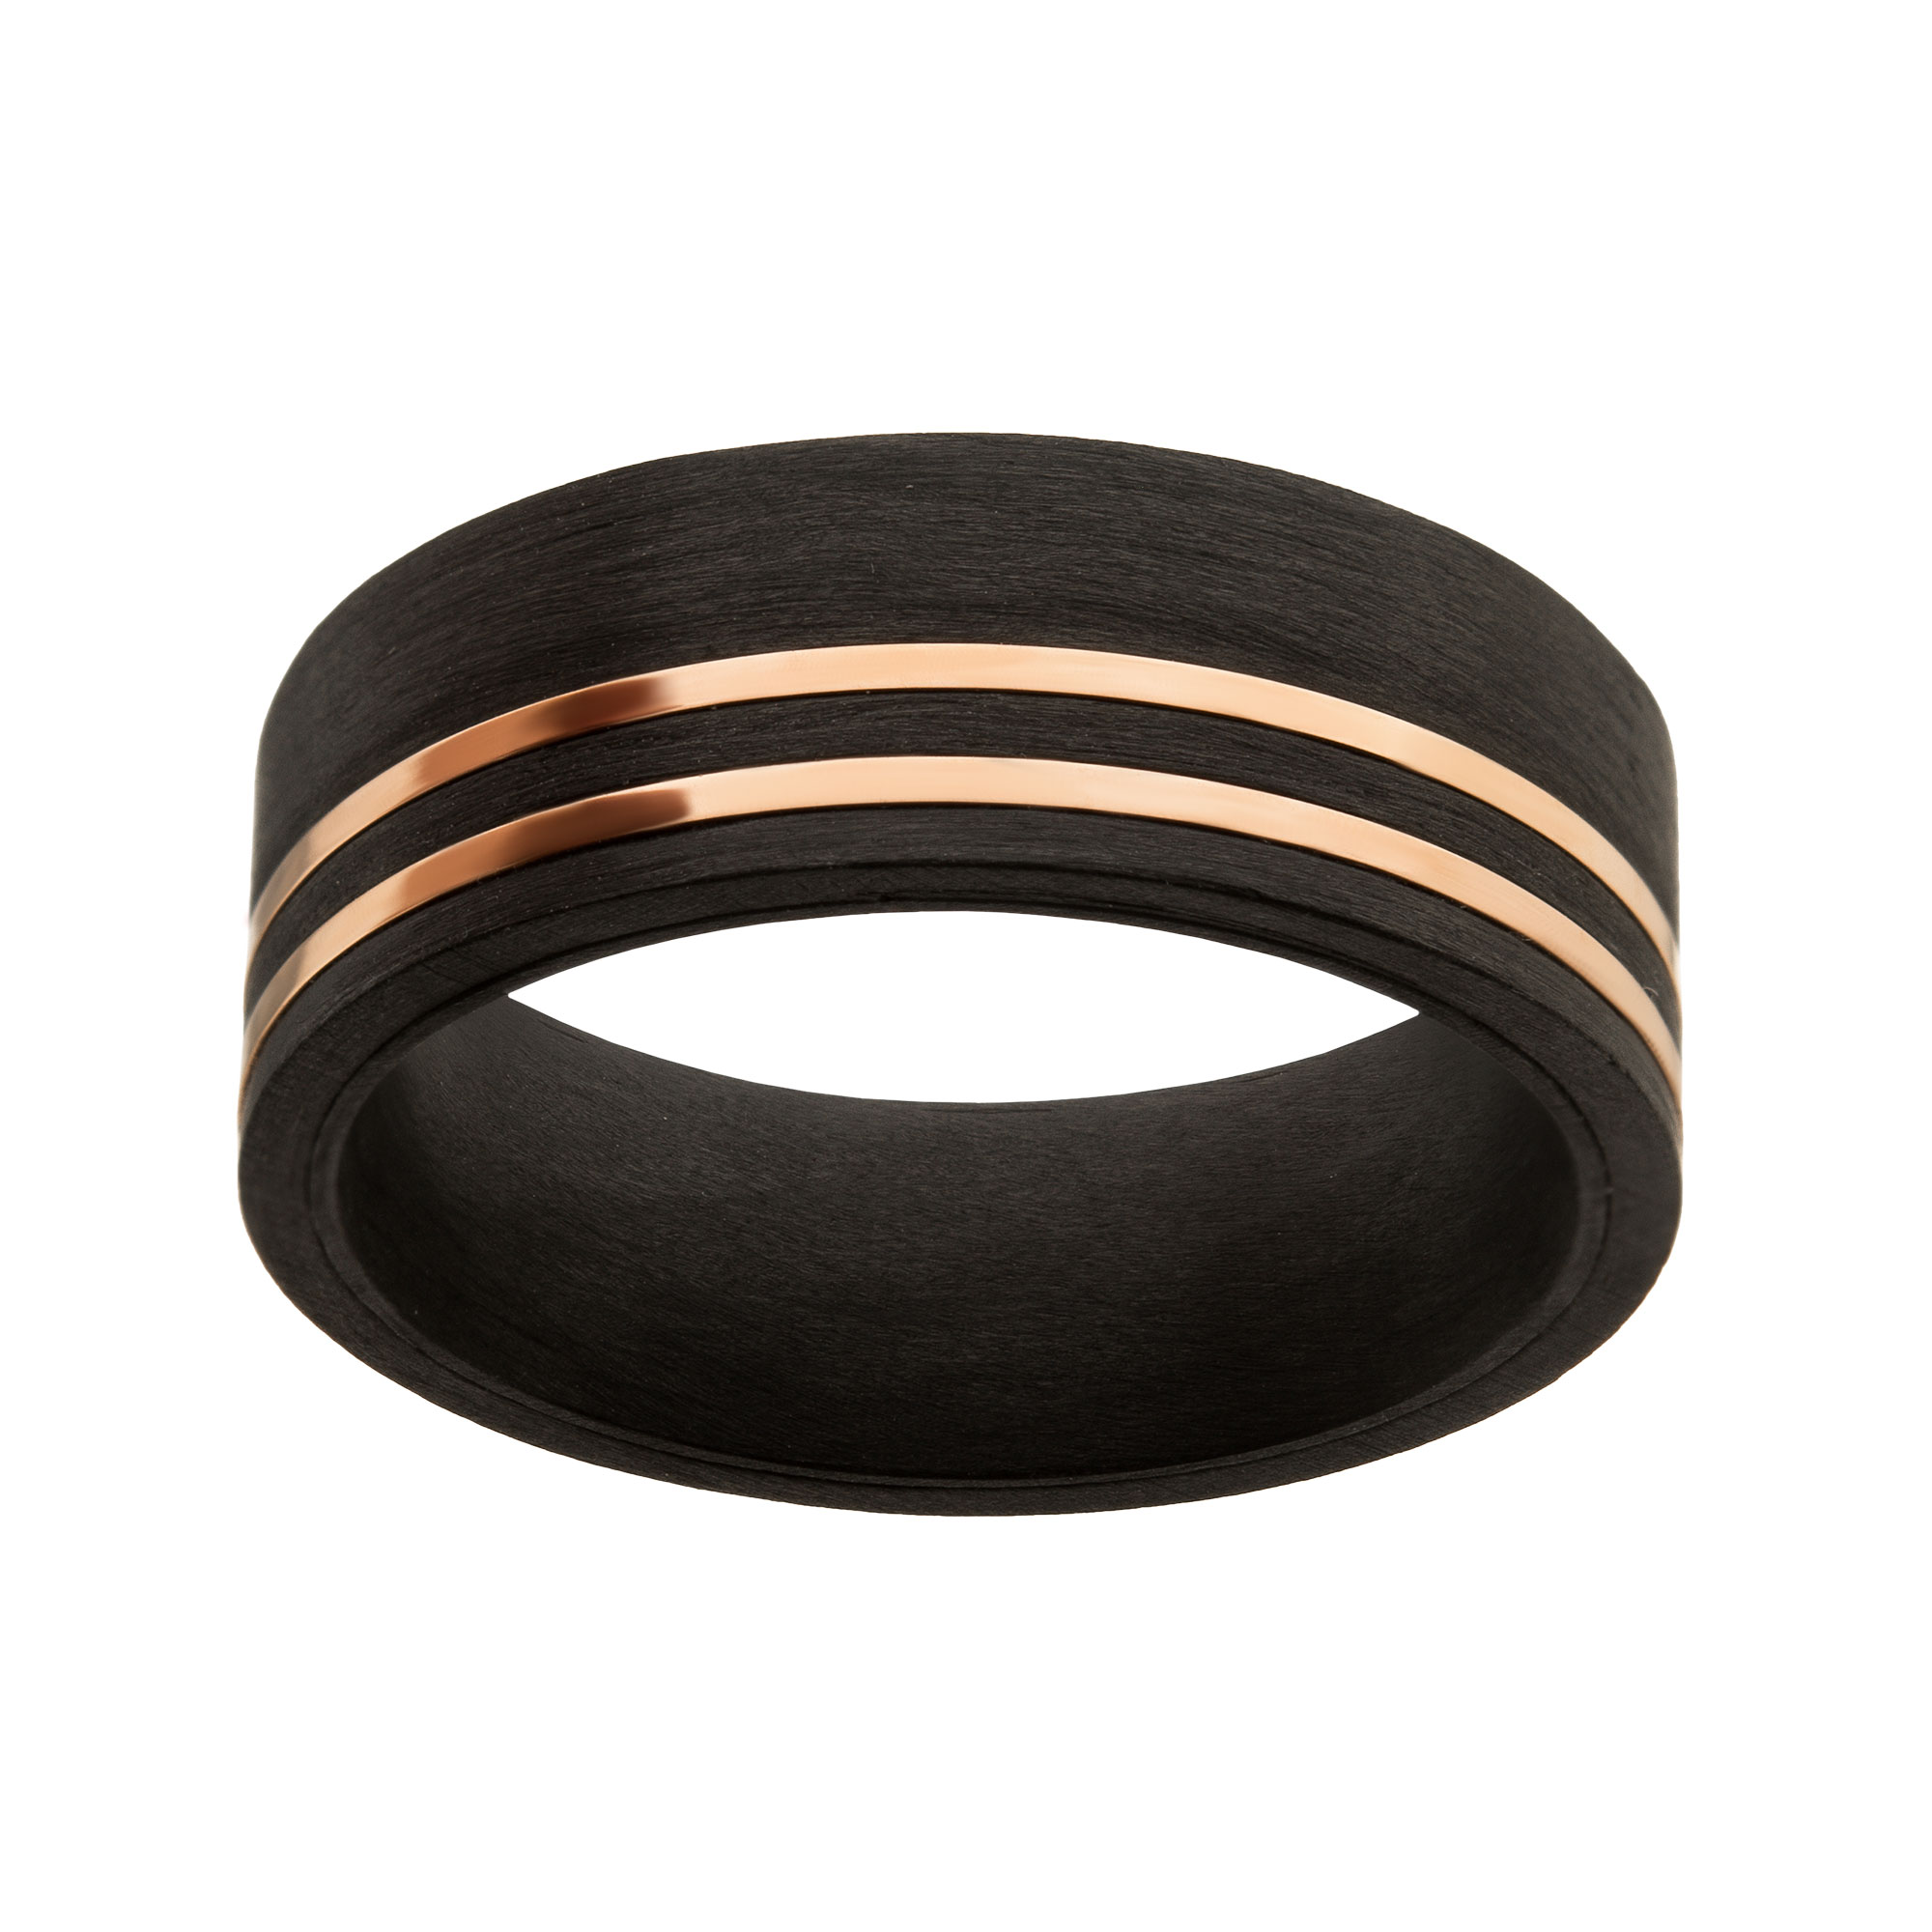 Solid Carbon with Inlayed Rose Gold Thin Lines Comfort Fit Ring Image 2 Morin Jewelers Southbridge, MA